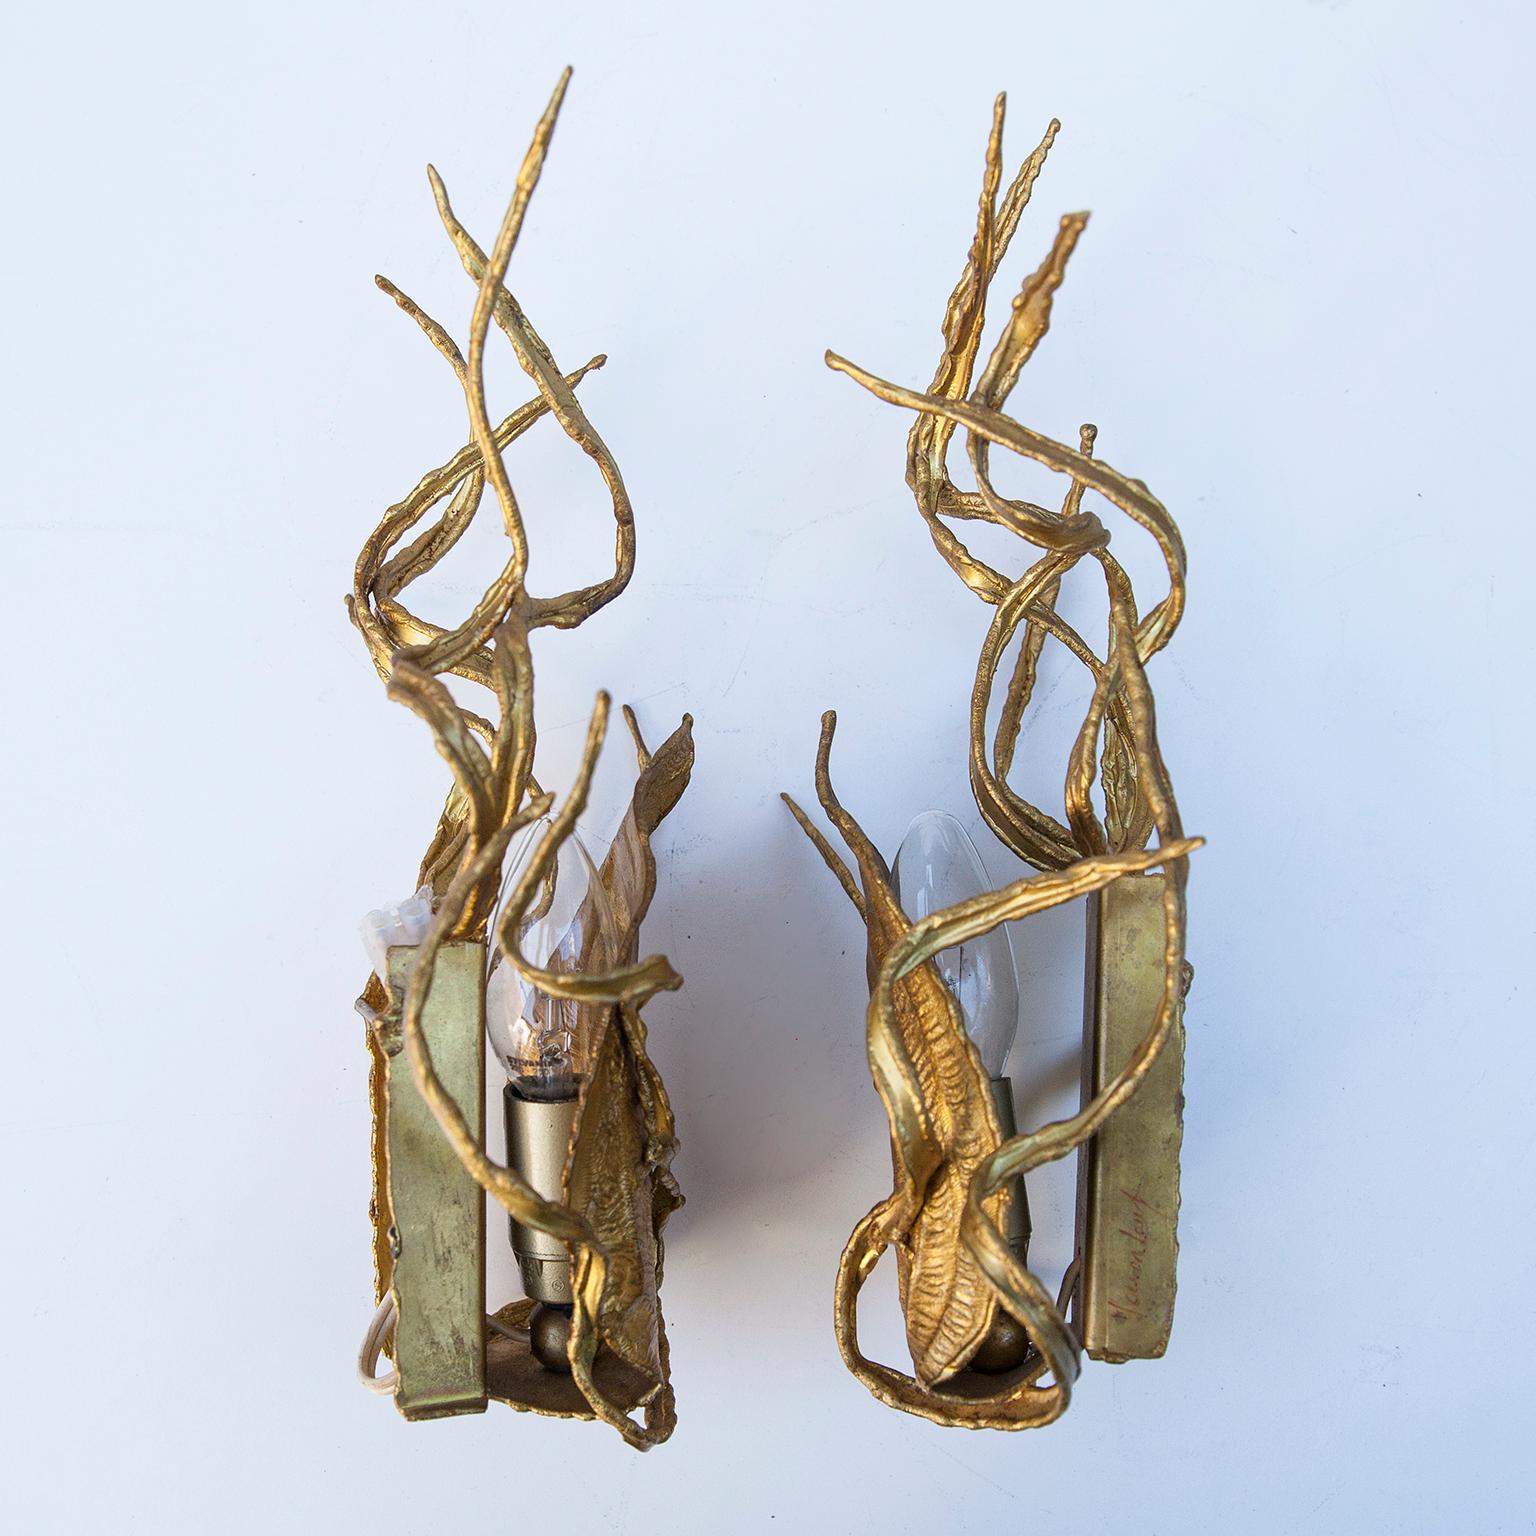 Pair of two brutalist wall lights from Belgium designer Paul Moerenhout, made in the 1970 in crafted brass with one bulb inside. Paul Moerenhout is a famous sculptor in Belgium, workshop at Bruxelles. Beautiful piece with a gilded shinning with his